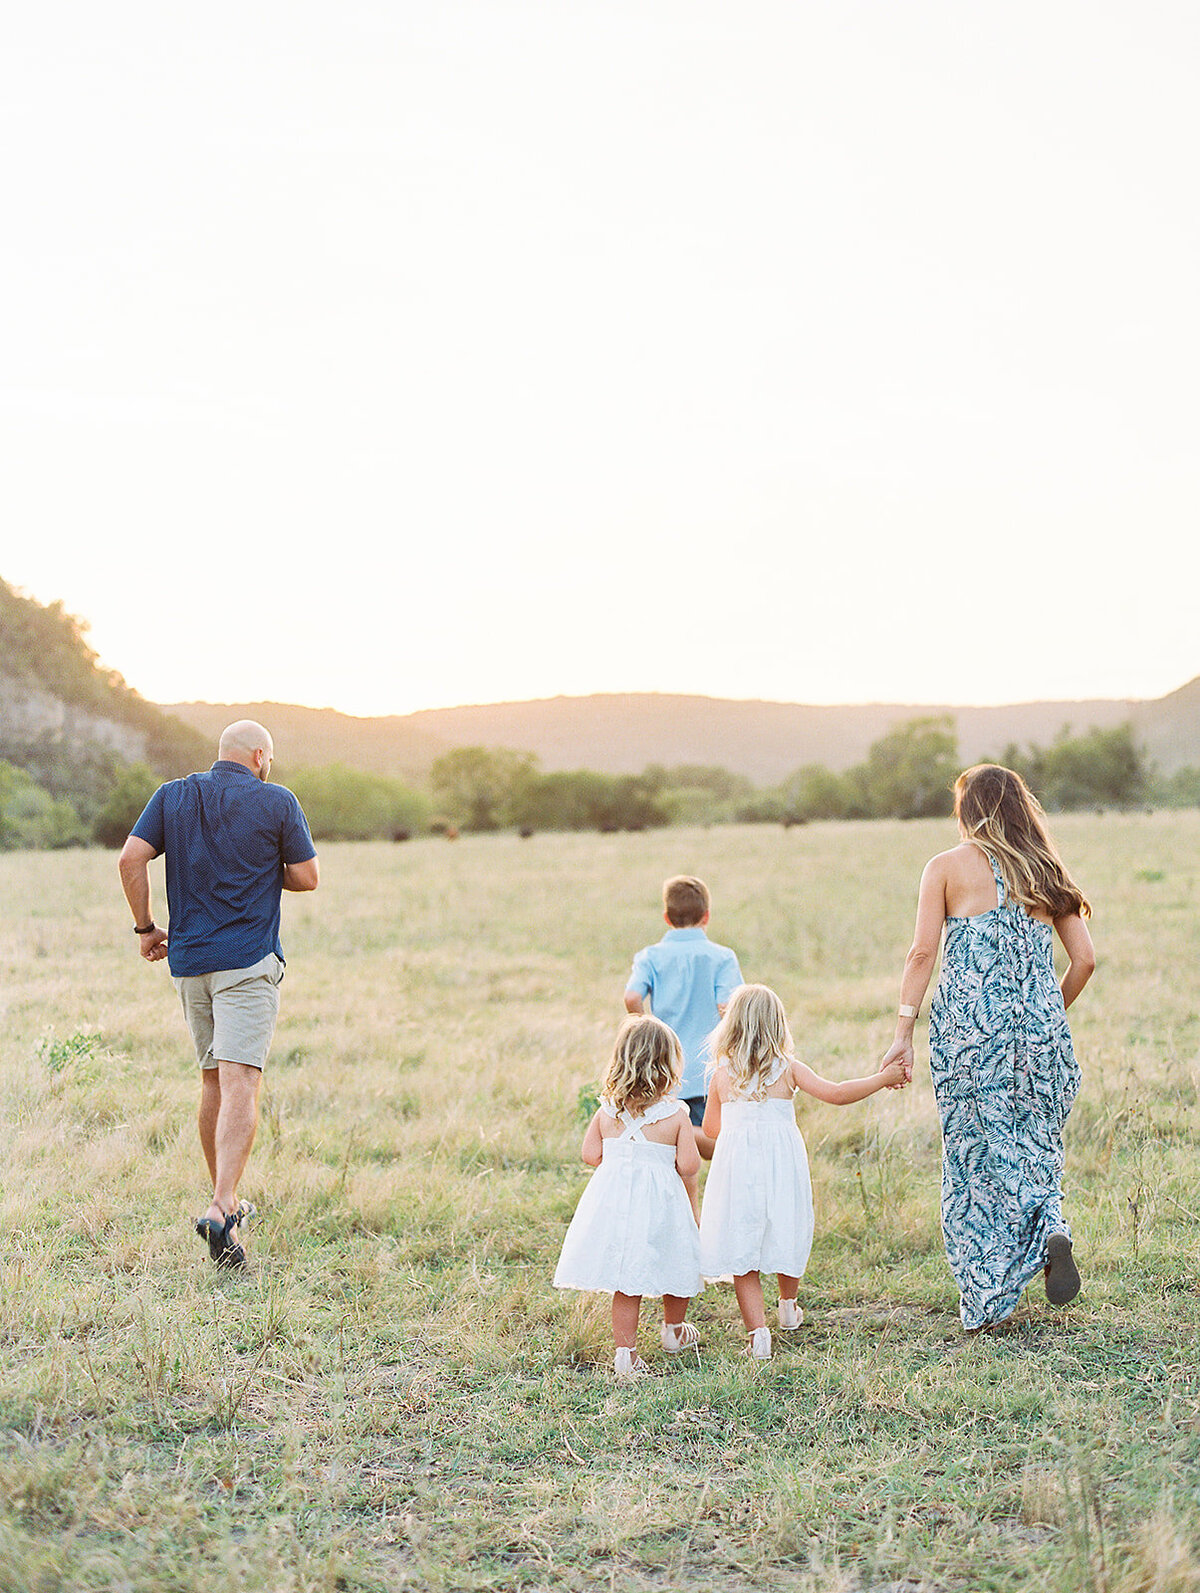 Family of five holding hands and running through a grassy field